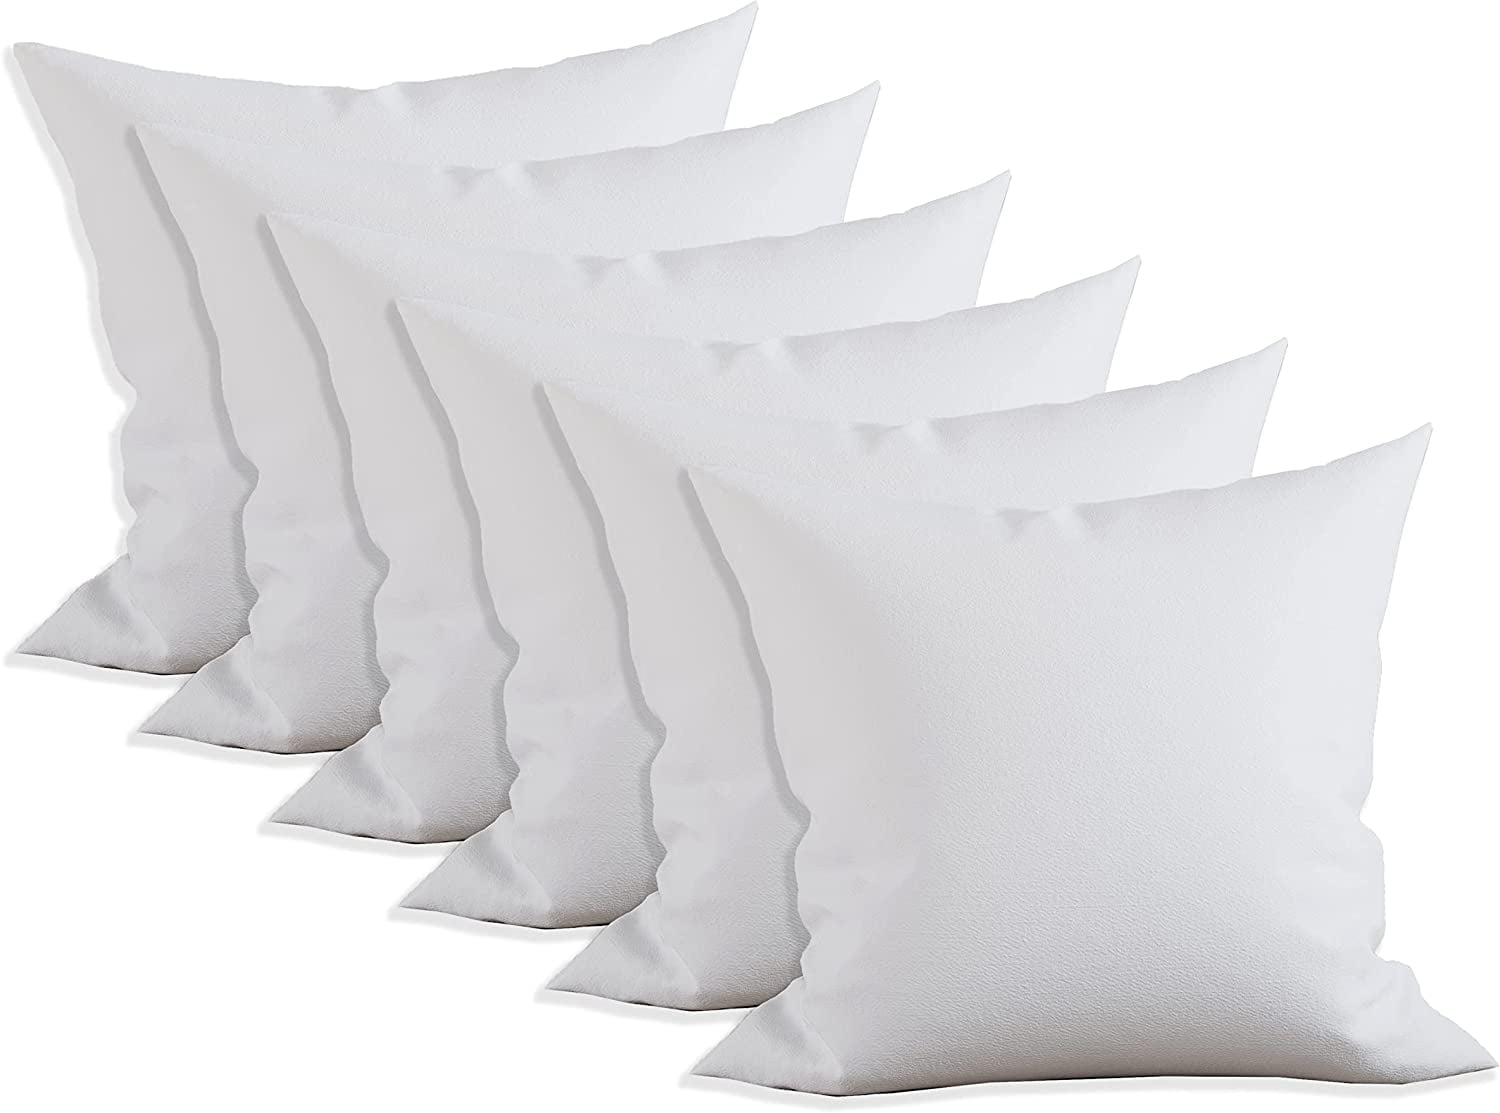 Decorative Throw Pillow Insert: Set of 4 Square Soft (White, 18x18) For Sofa,  Bench, Bed, Auto Seat Hypoallergenic Bed Couch Sofa- Indoor Decorative  Cushion 